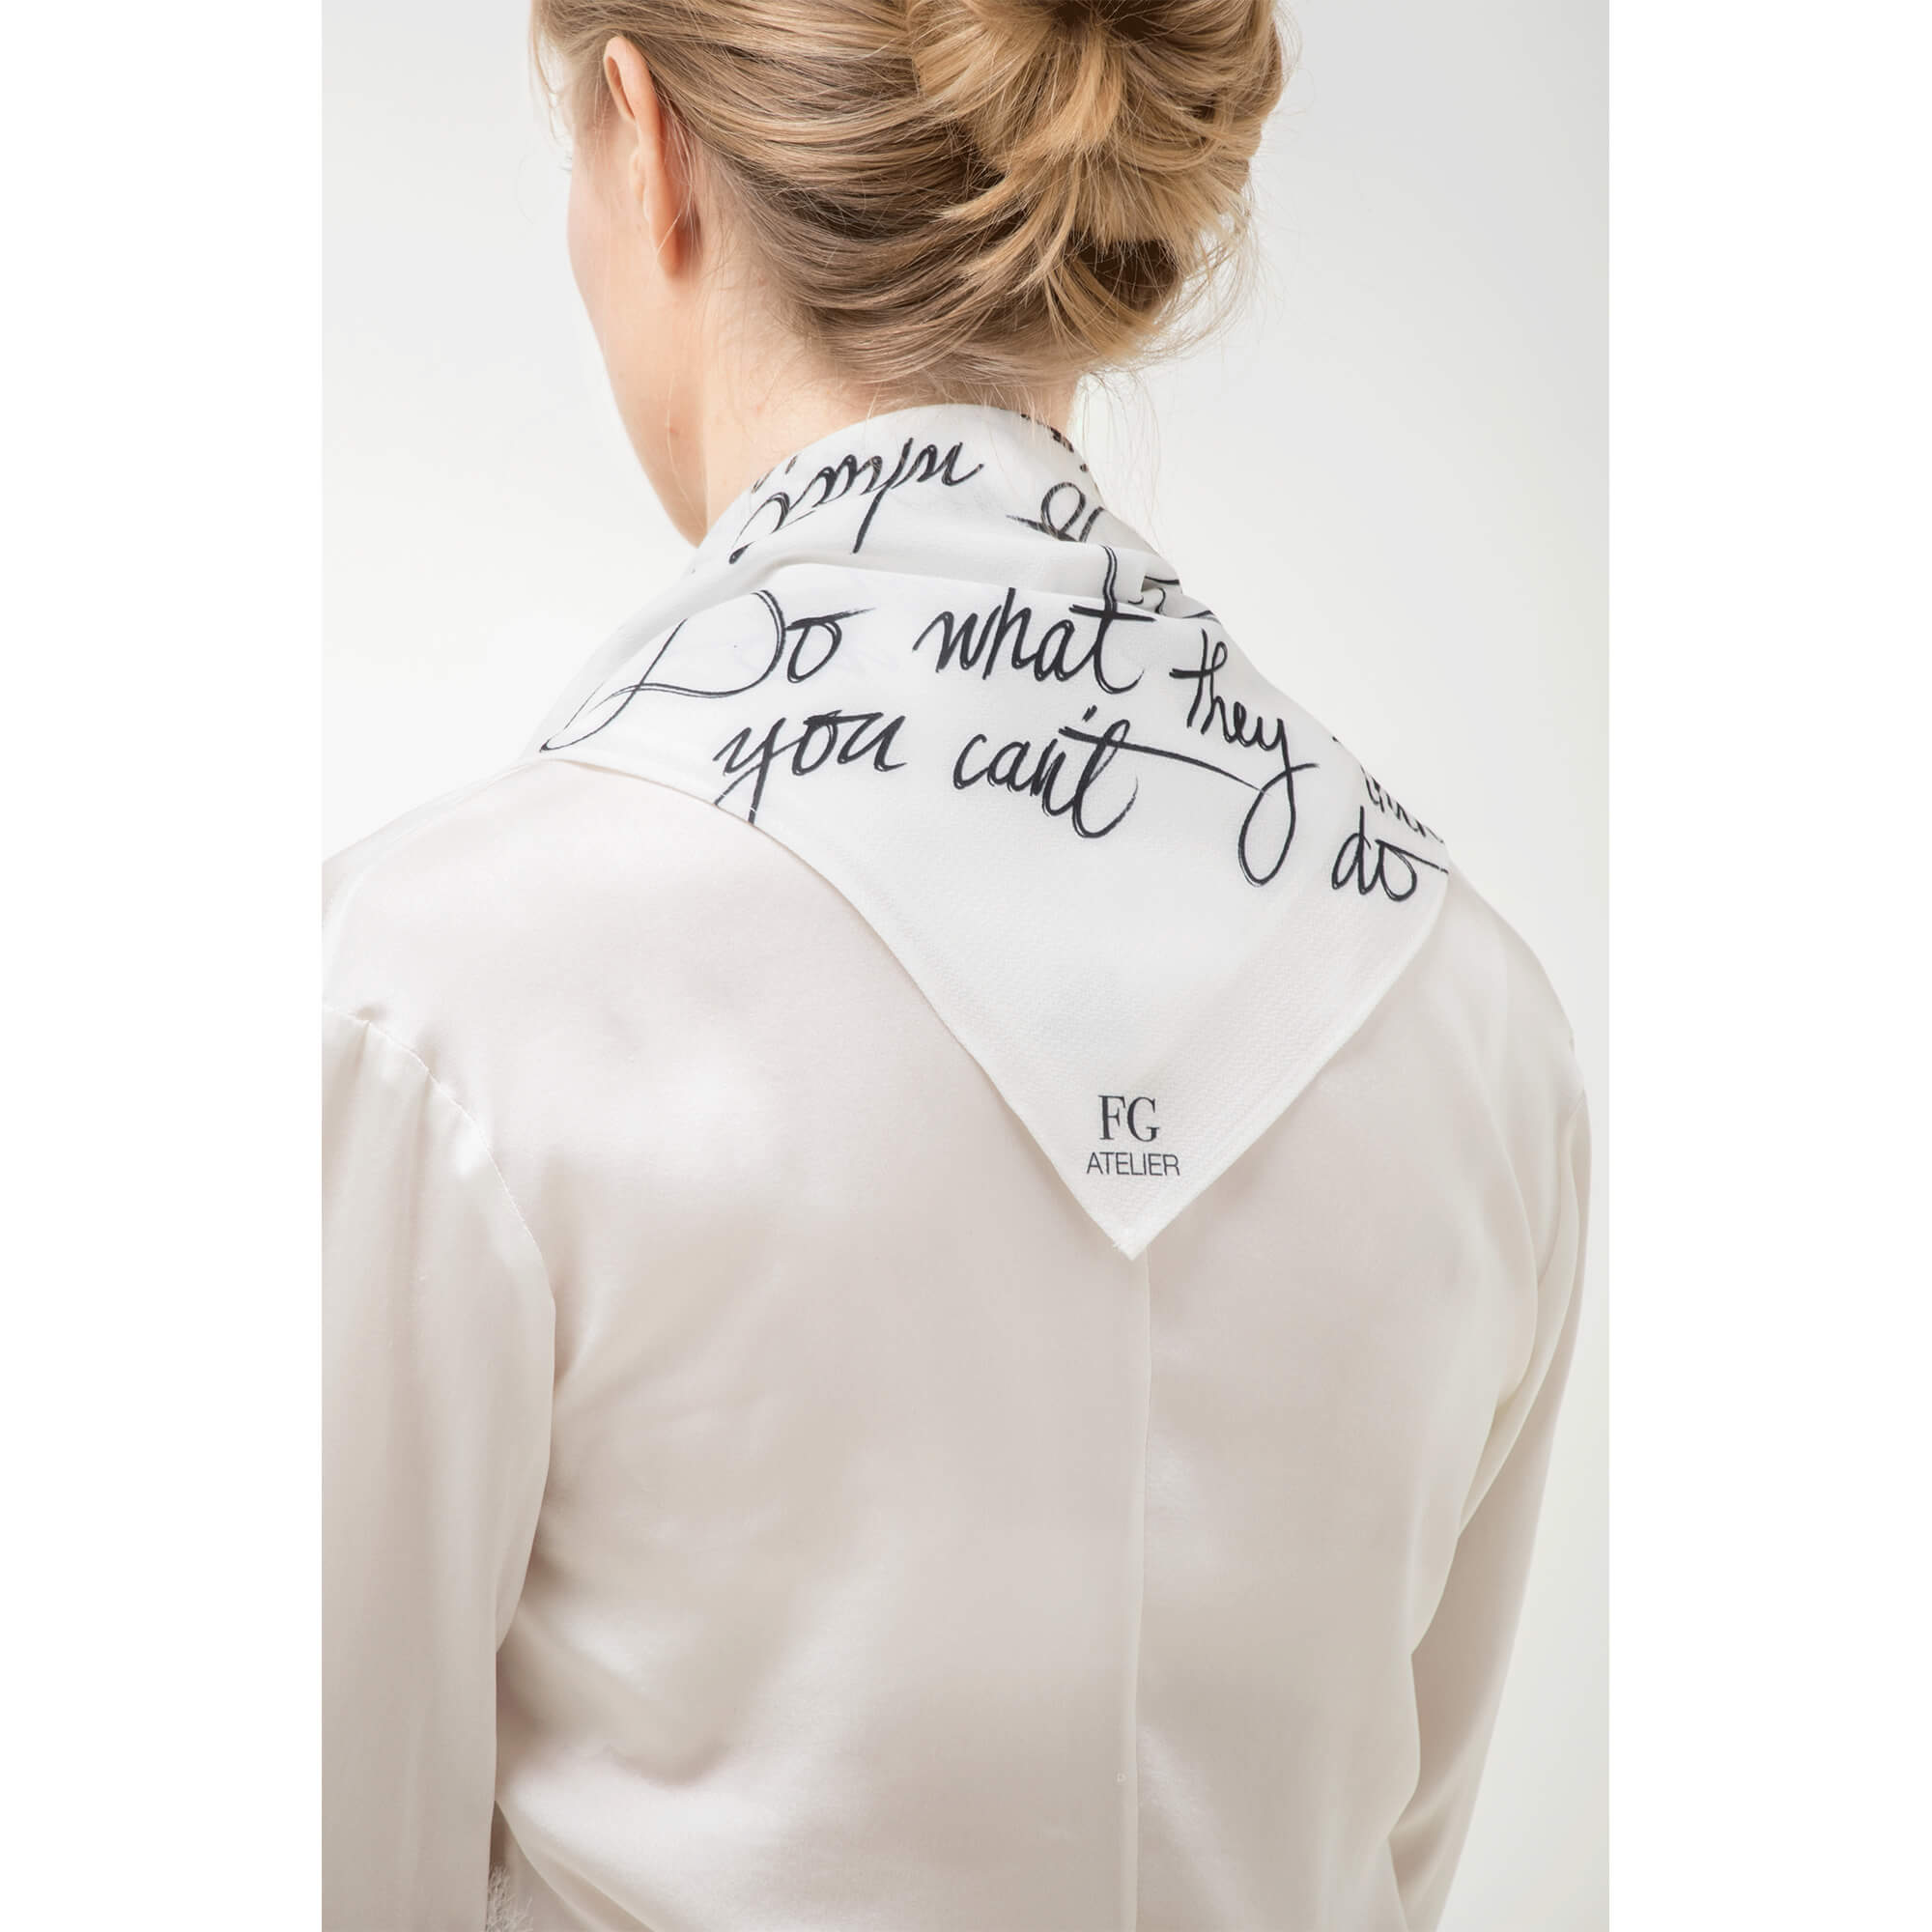 Black and White Calligraphy Print Scarf  Do what they think you can t do